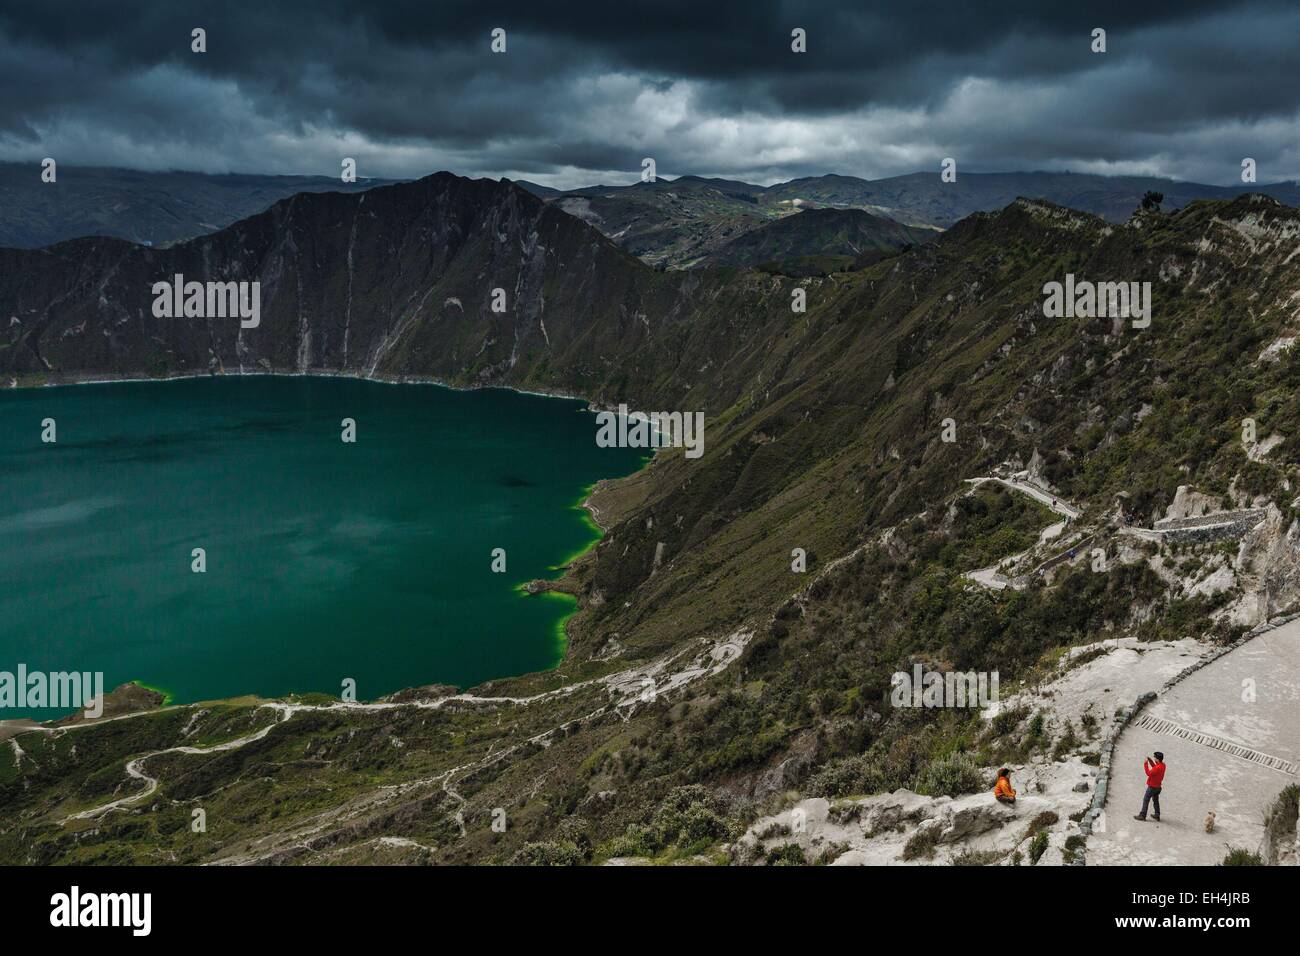 Ecuador, Cotopaxi, Quilotoa Crater Lake, panoramic view of tourists photographing over a lagoon in the crater of an extinct volcano, under a stormy sky Stock Photo